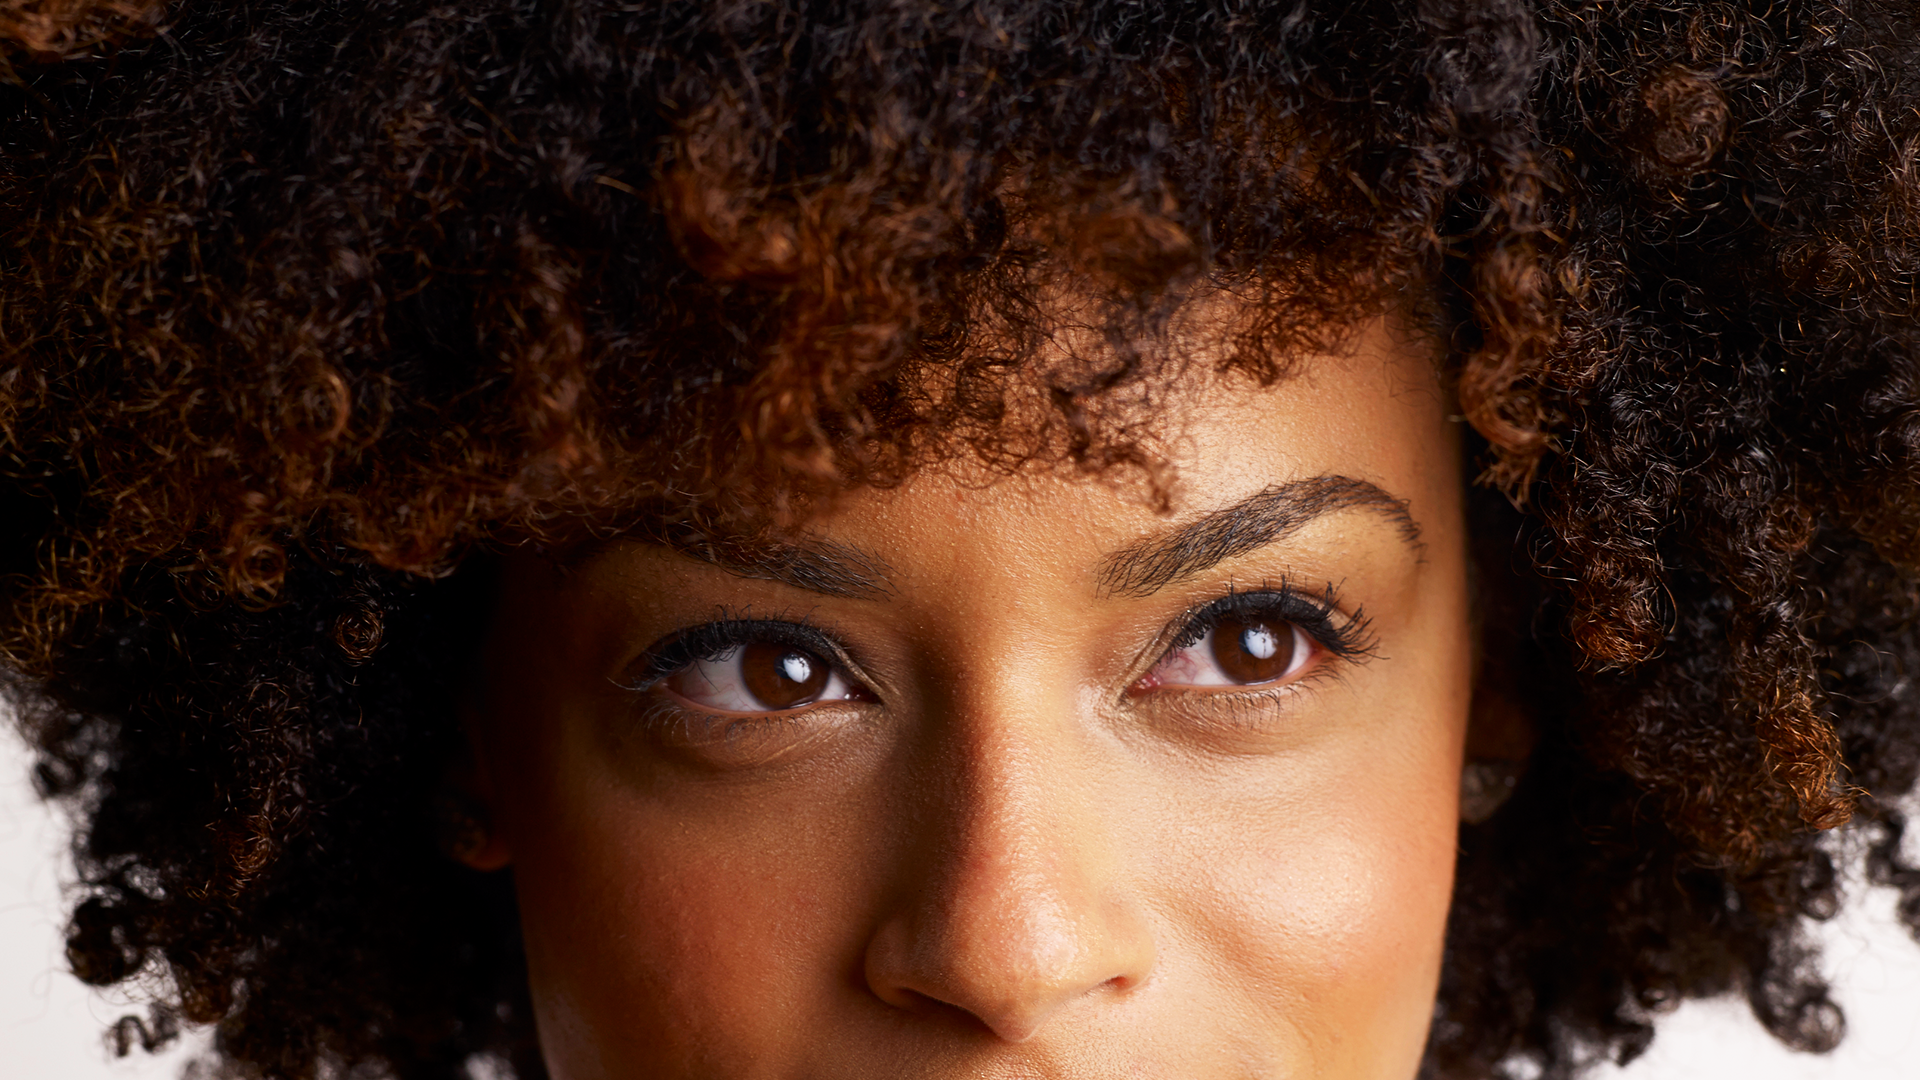 4c natural hair in pictures of brown